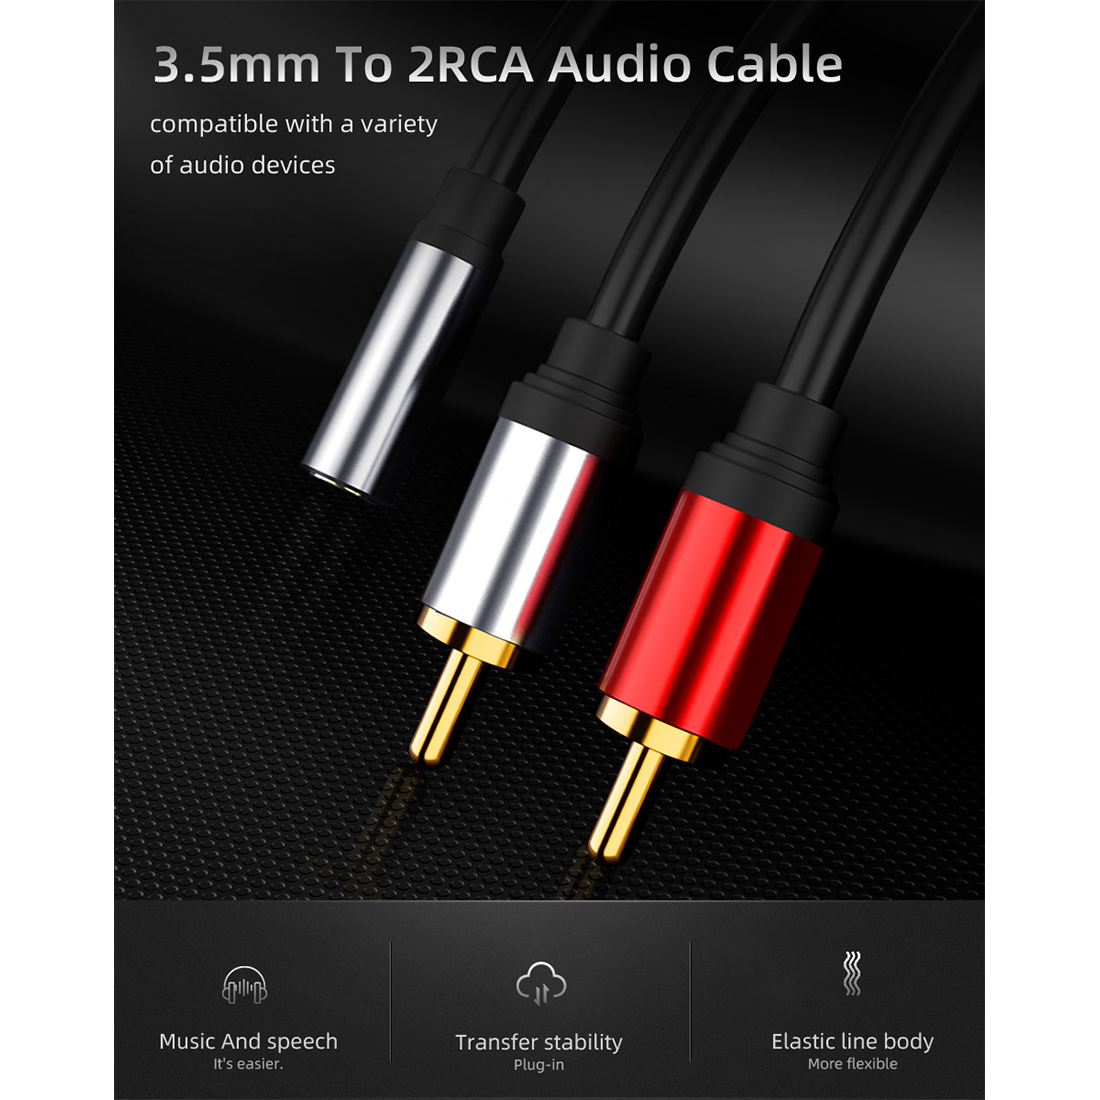 RCA Cable 2RCA Male to 3.5mm Female Audio Aux Cable 3.5mm Jack Rca Cable for MP3 Phone Home Theater DVD 2RCA Audio Cable - image 4 of 5